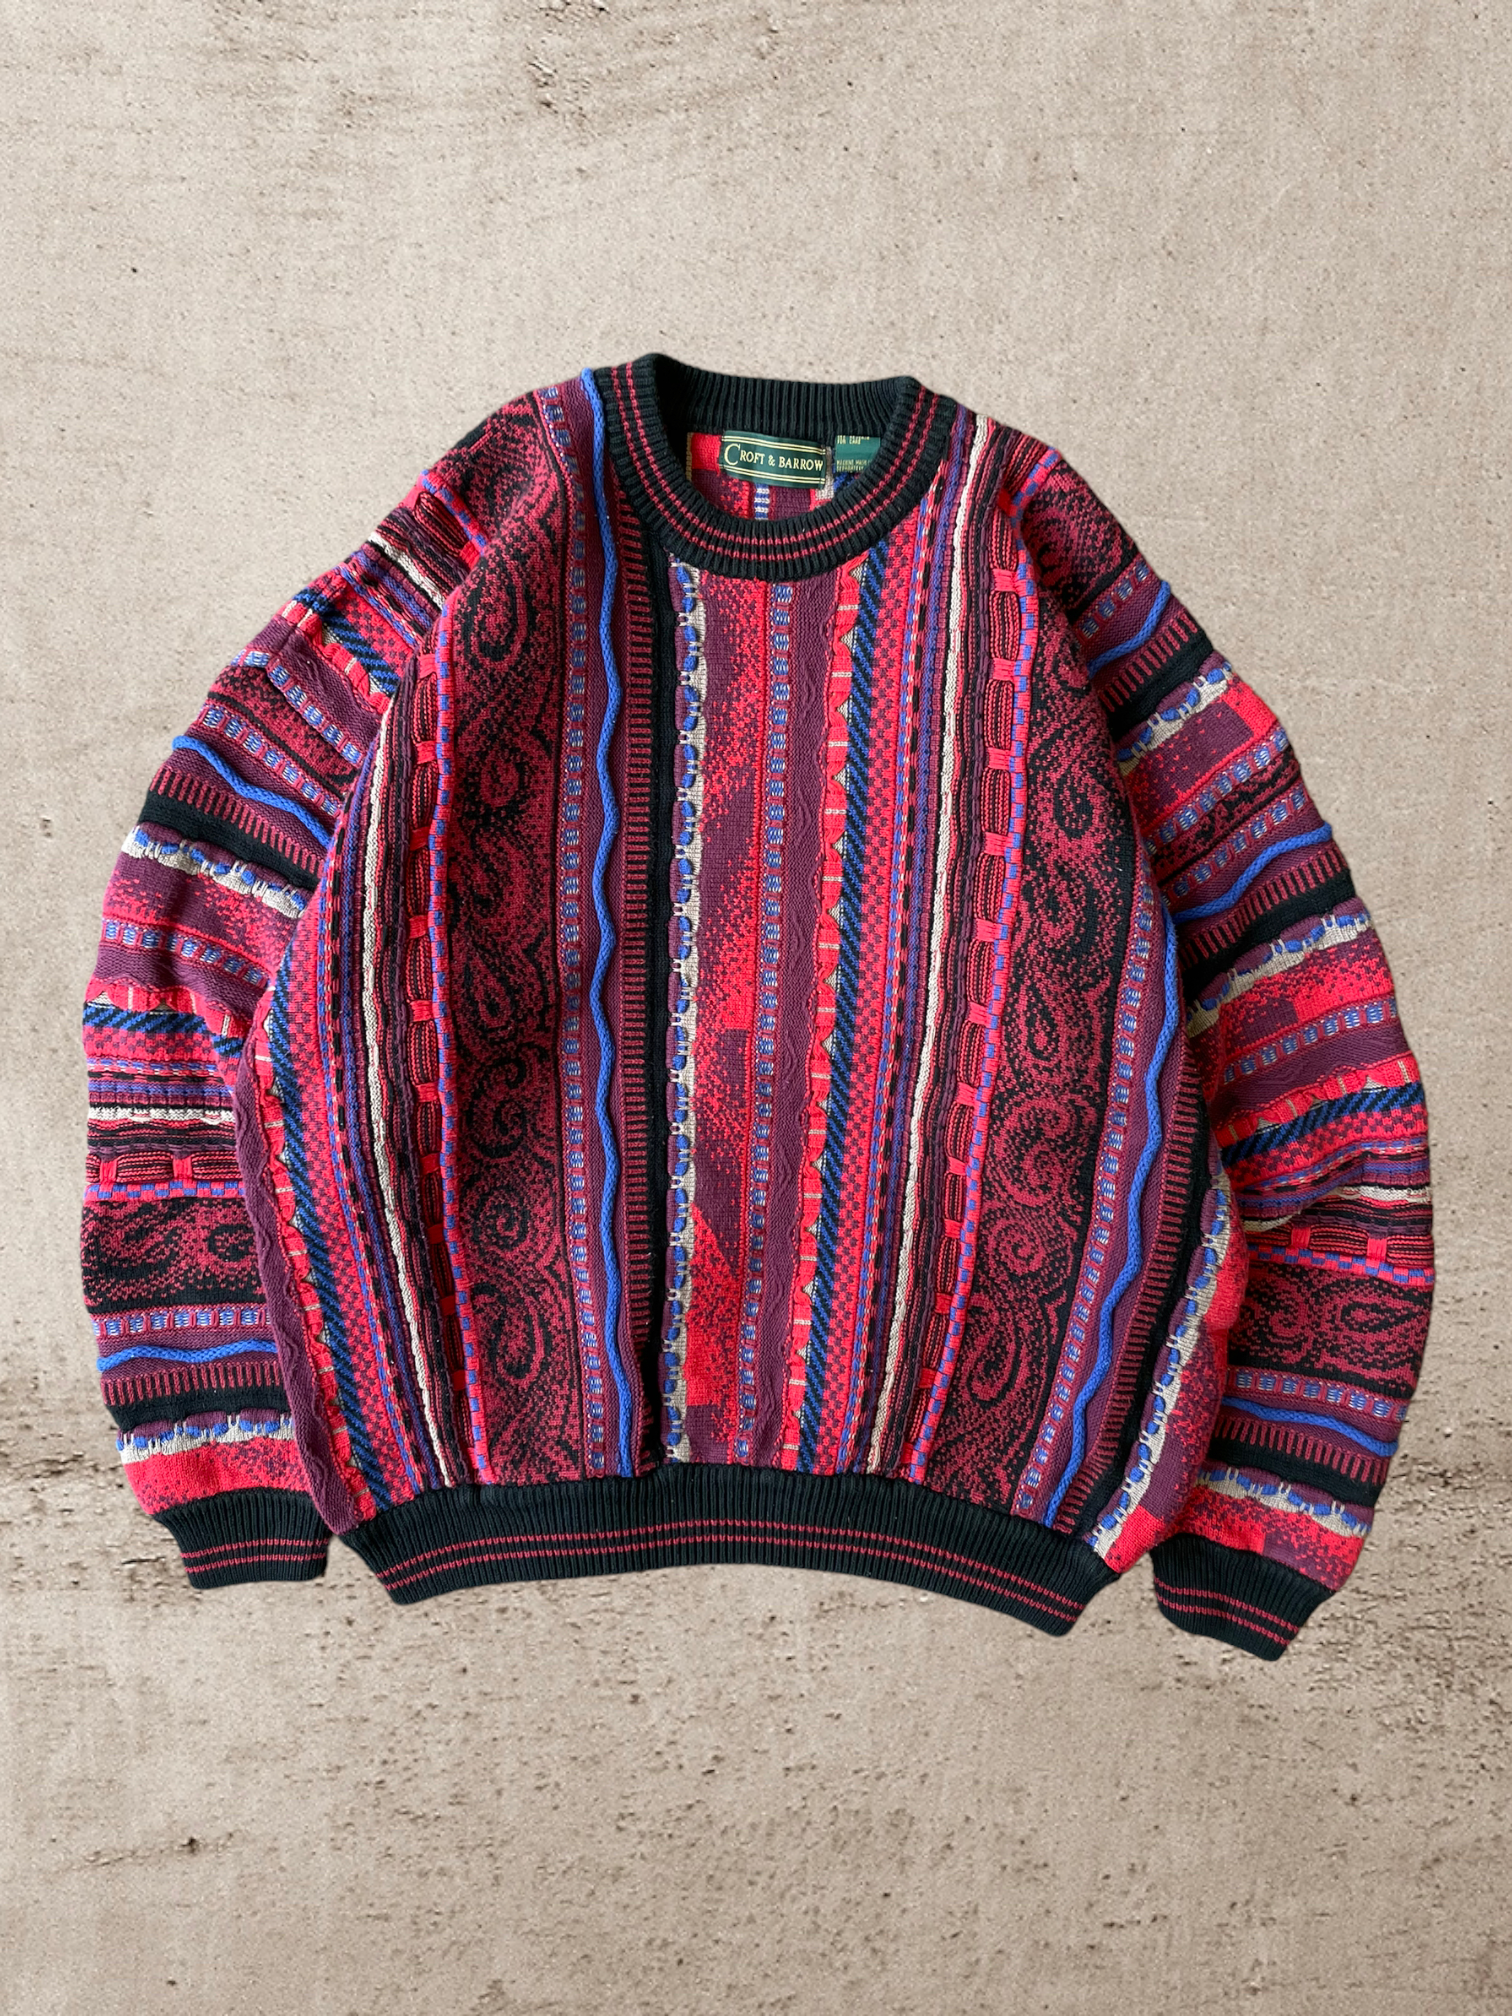 90s Multicolor Knit Sweater - X-Large